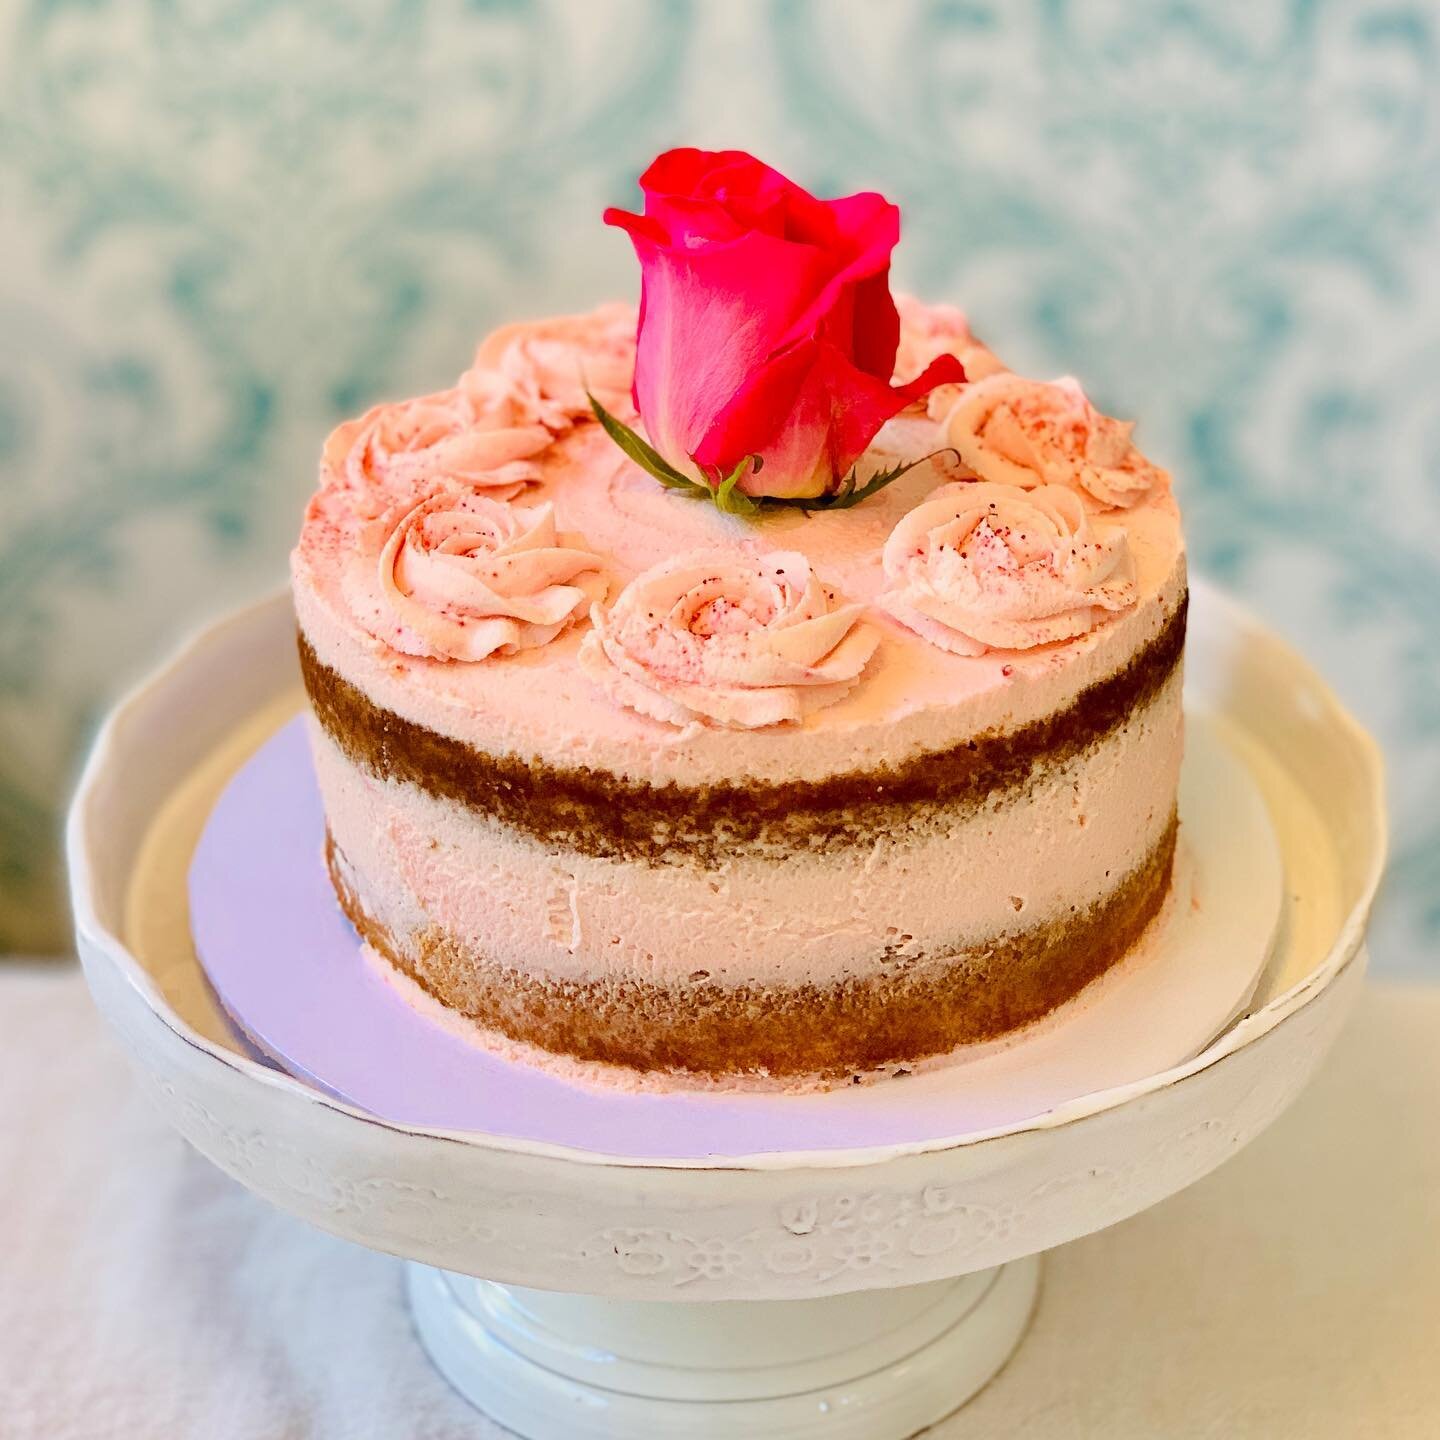 Rose Cake! I got to bake a cake for a new friend today. Happy Birthday Emily! Thank you so much for the order Jeremy.